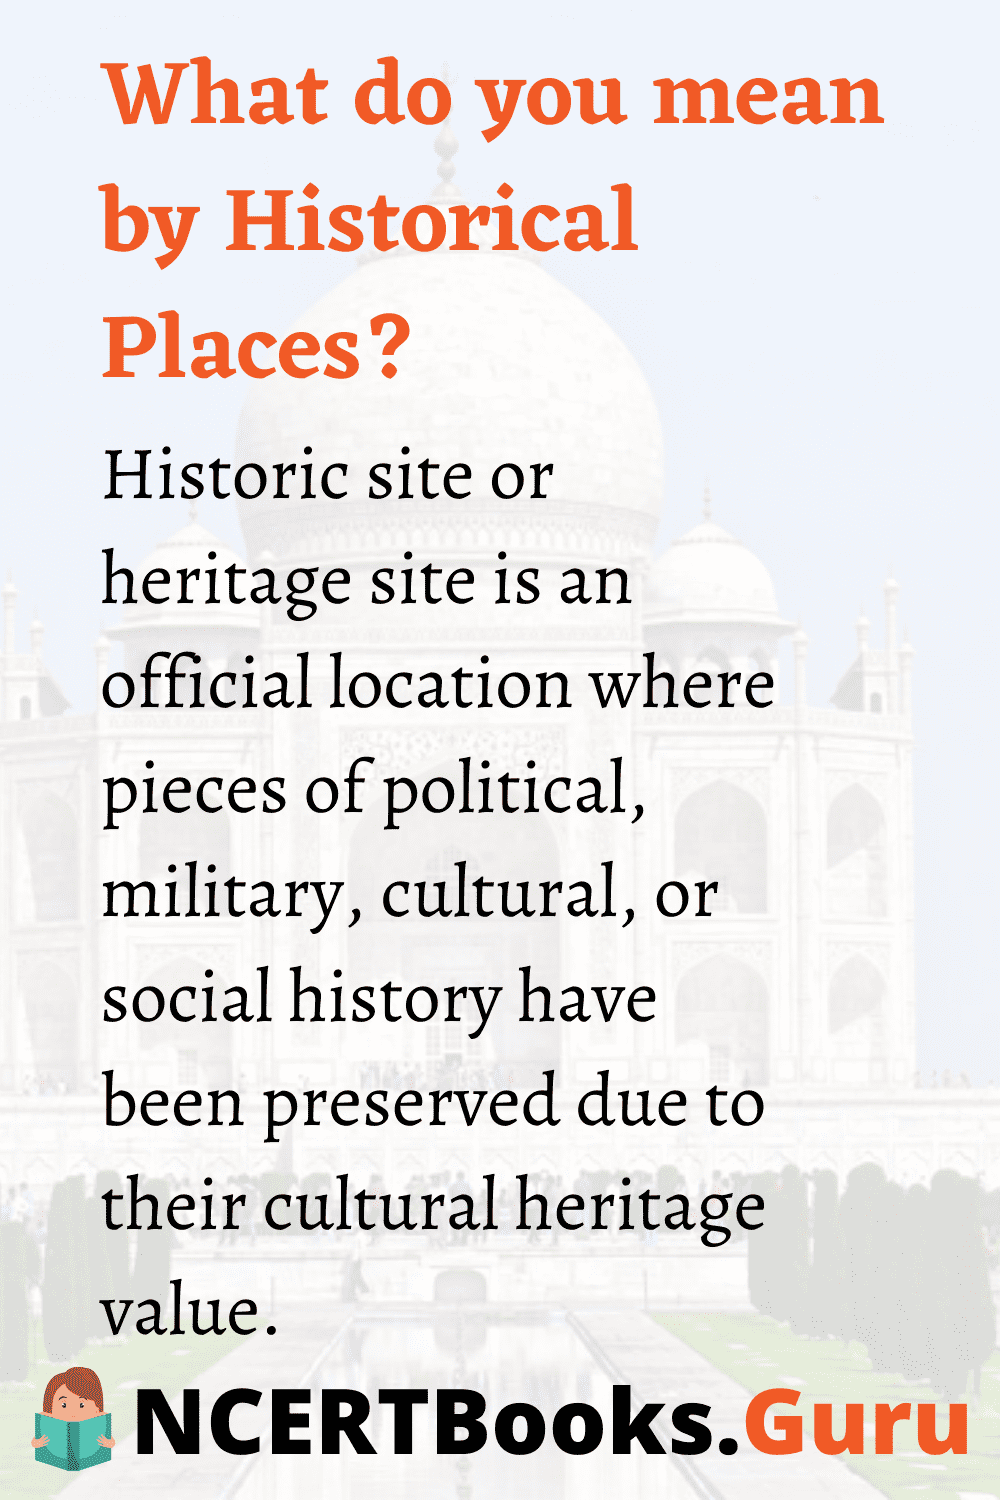 What do you mean by Historic Places